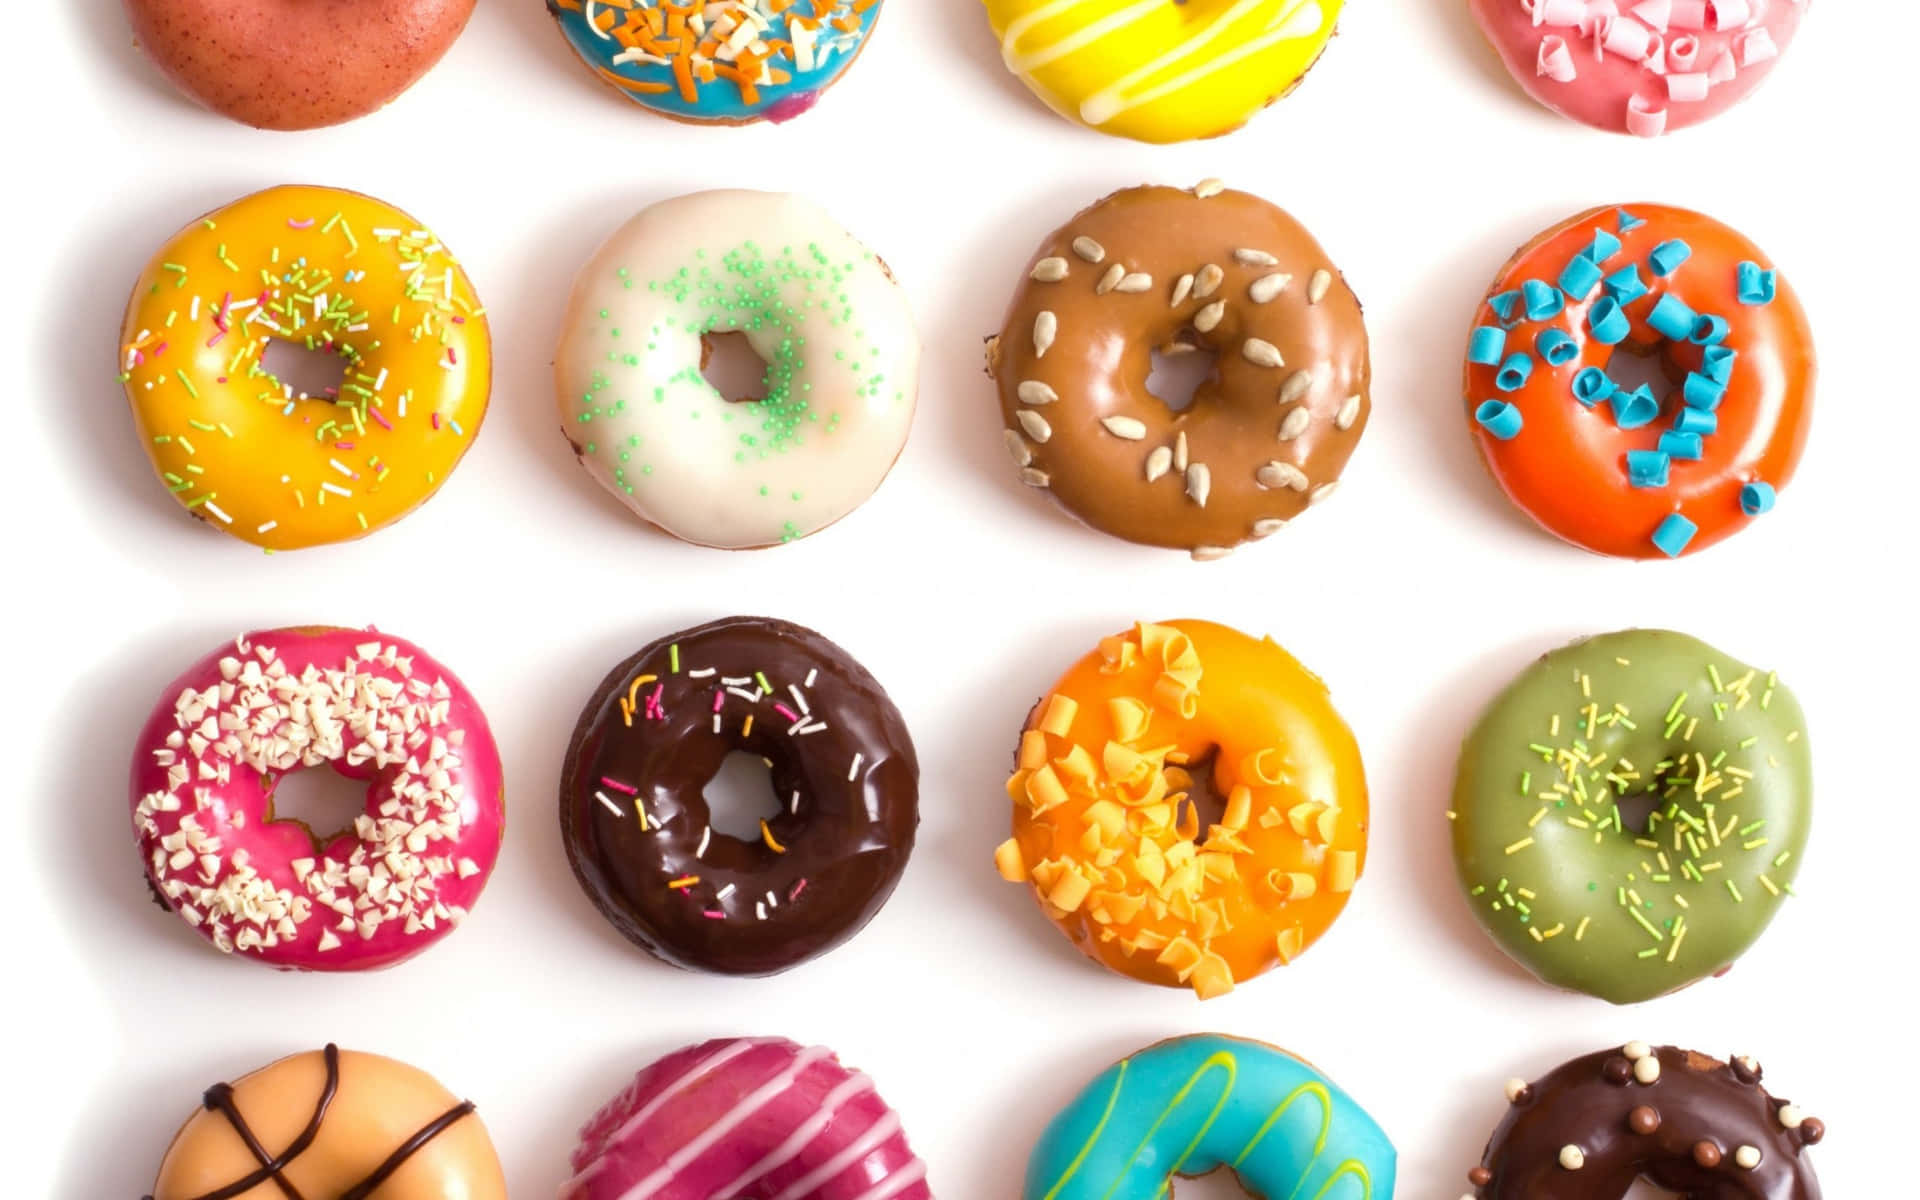 Fresh Donuts on a Colorful Background